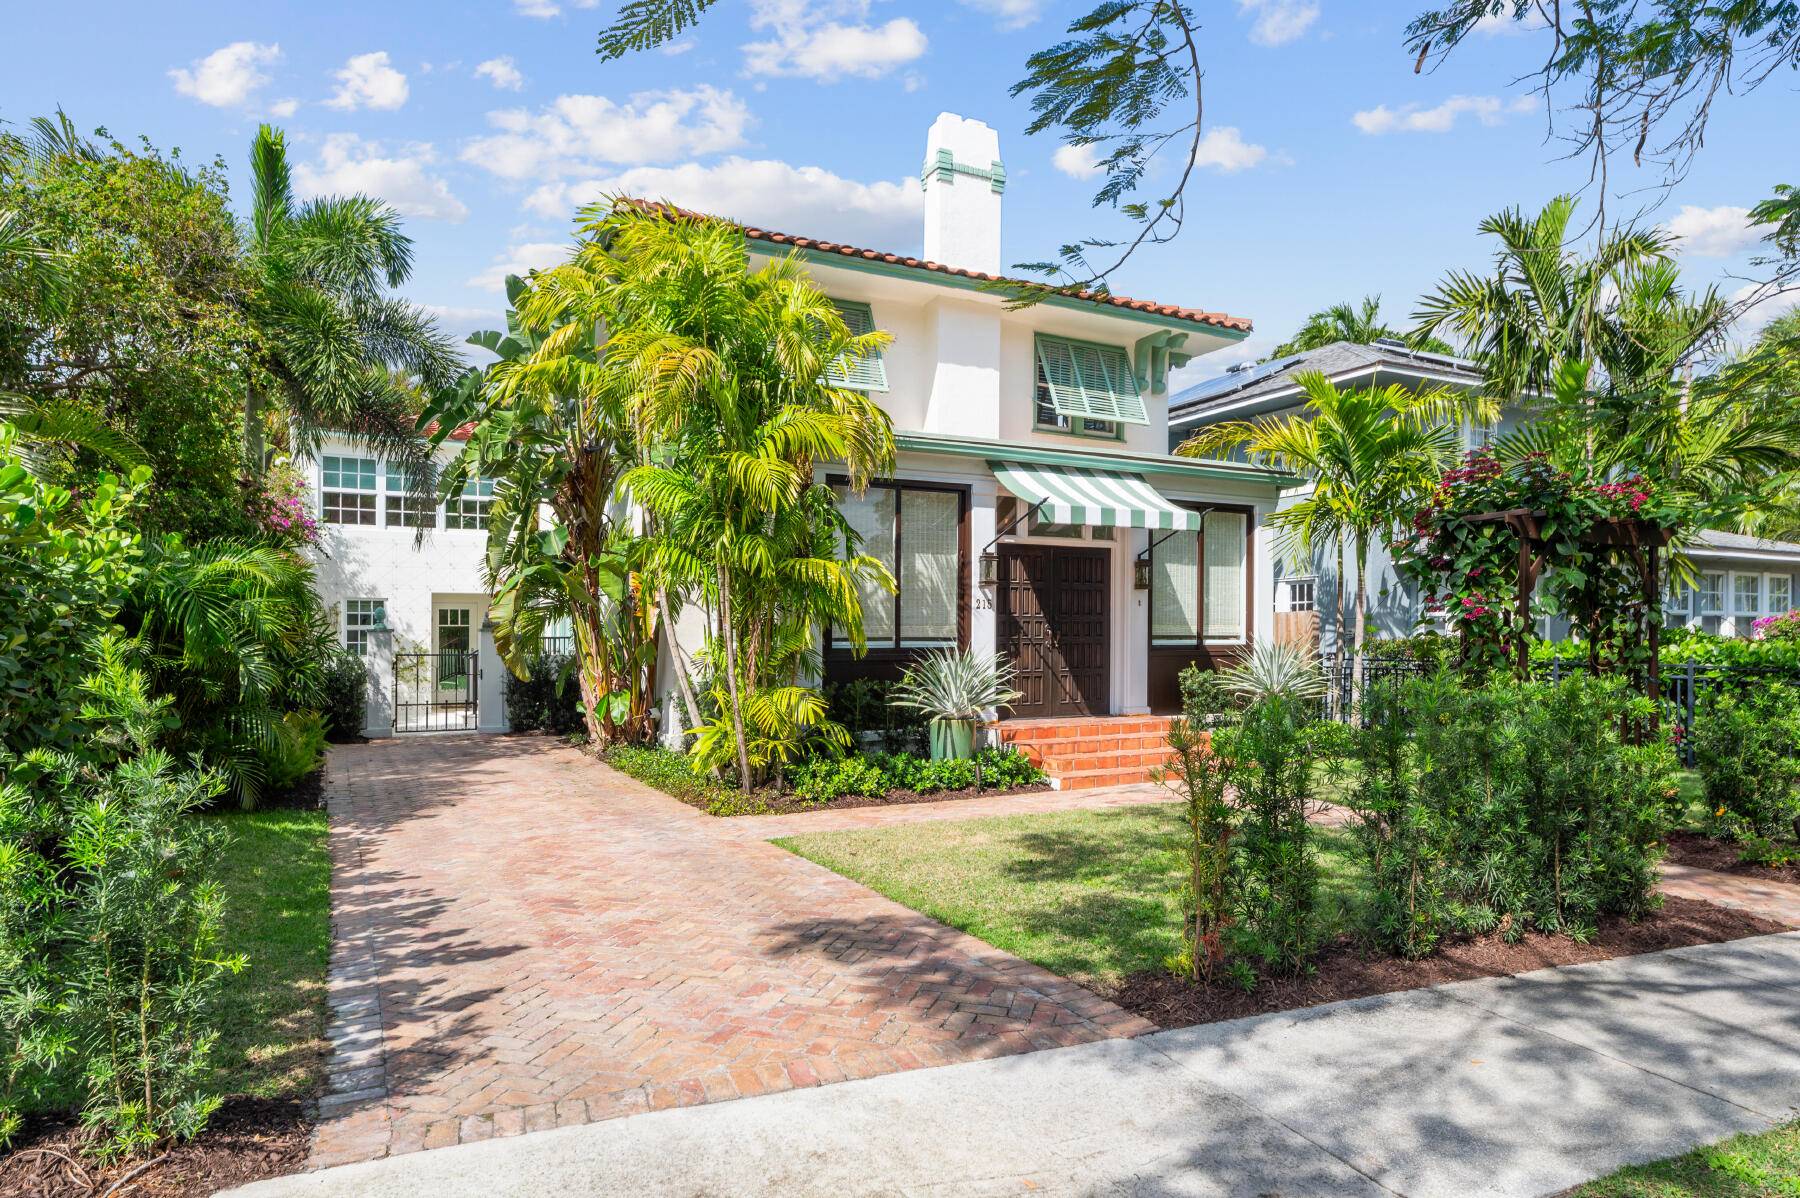 Enjoy this Gorgeous Mediterranean Revival in Historic Prospect Park boasting 3 beds, 2 1 2 baths, and a chic 1 bed 1 bath guest house.